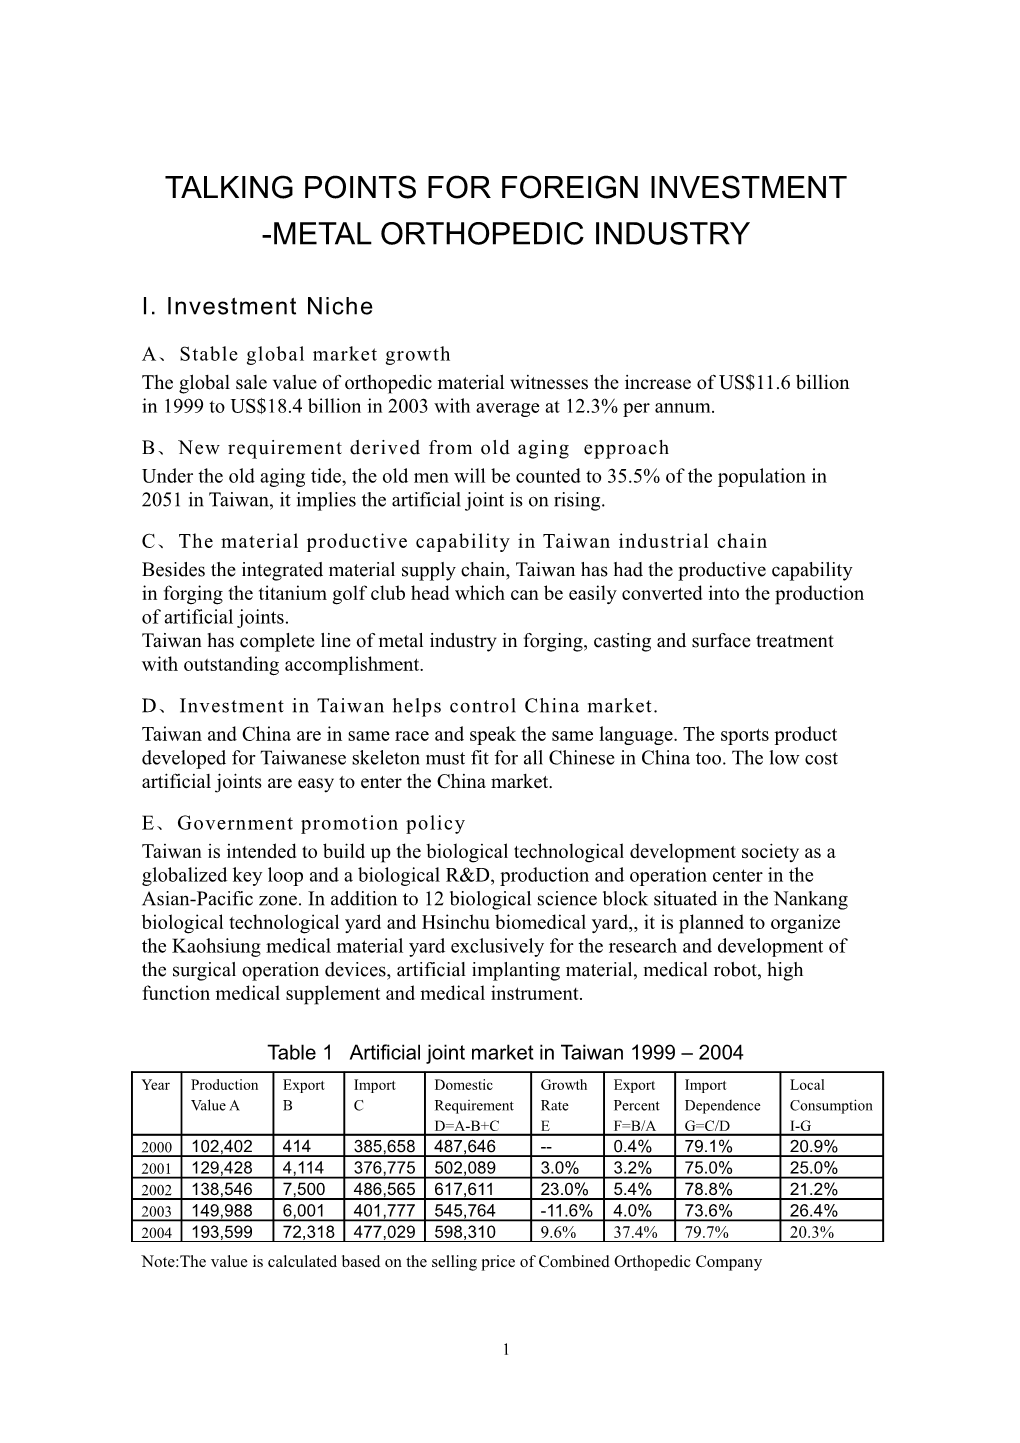 Talking Points for Foreign Investment -Metal Orthopedic Industry